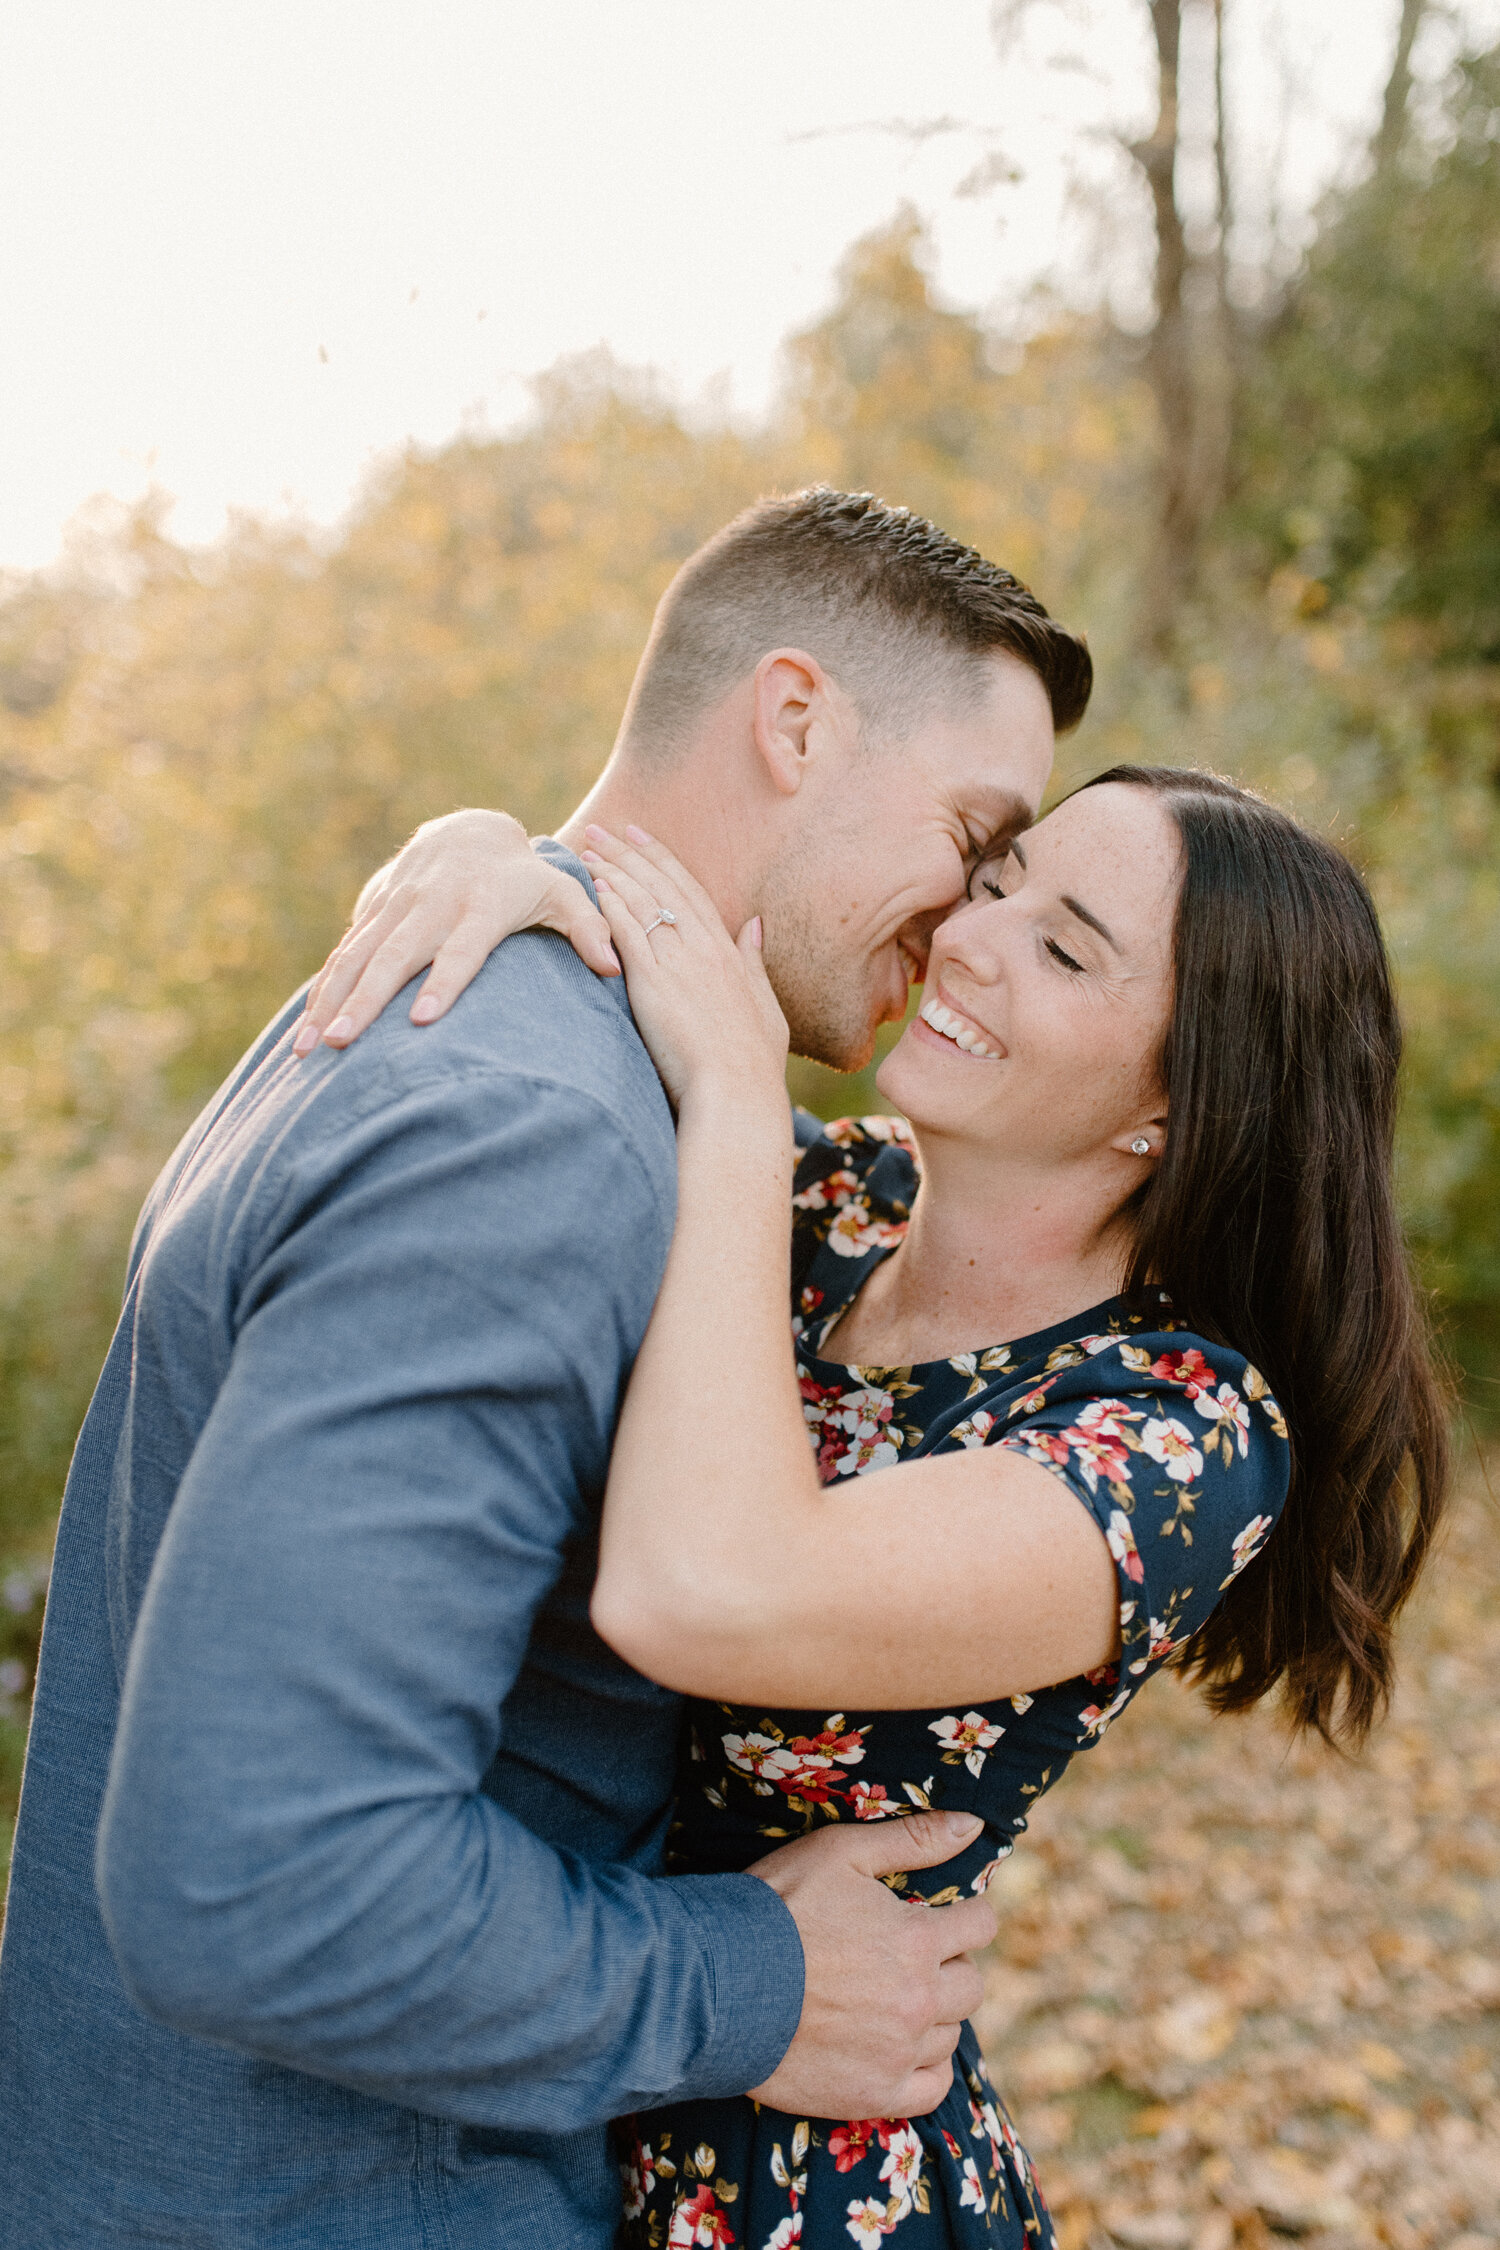  During their engagement session in Brockville, Ontario, this engaged couple wrapped their arms around one another while they smiled and laughed. man whispering into womans ear smiling playful engagement session engaged couple hugging and wrapping ar